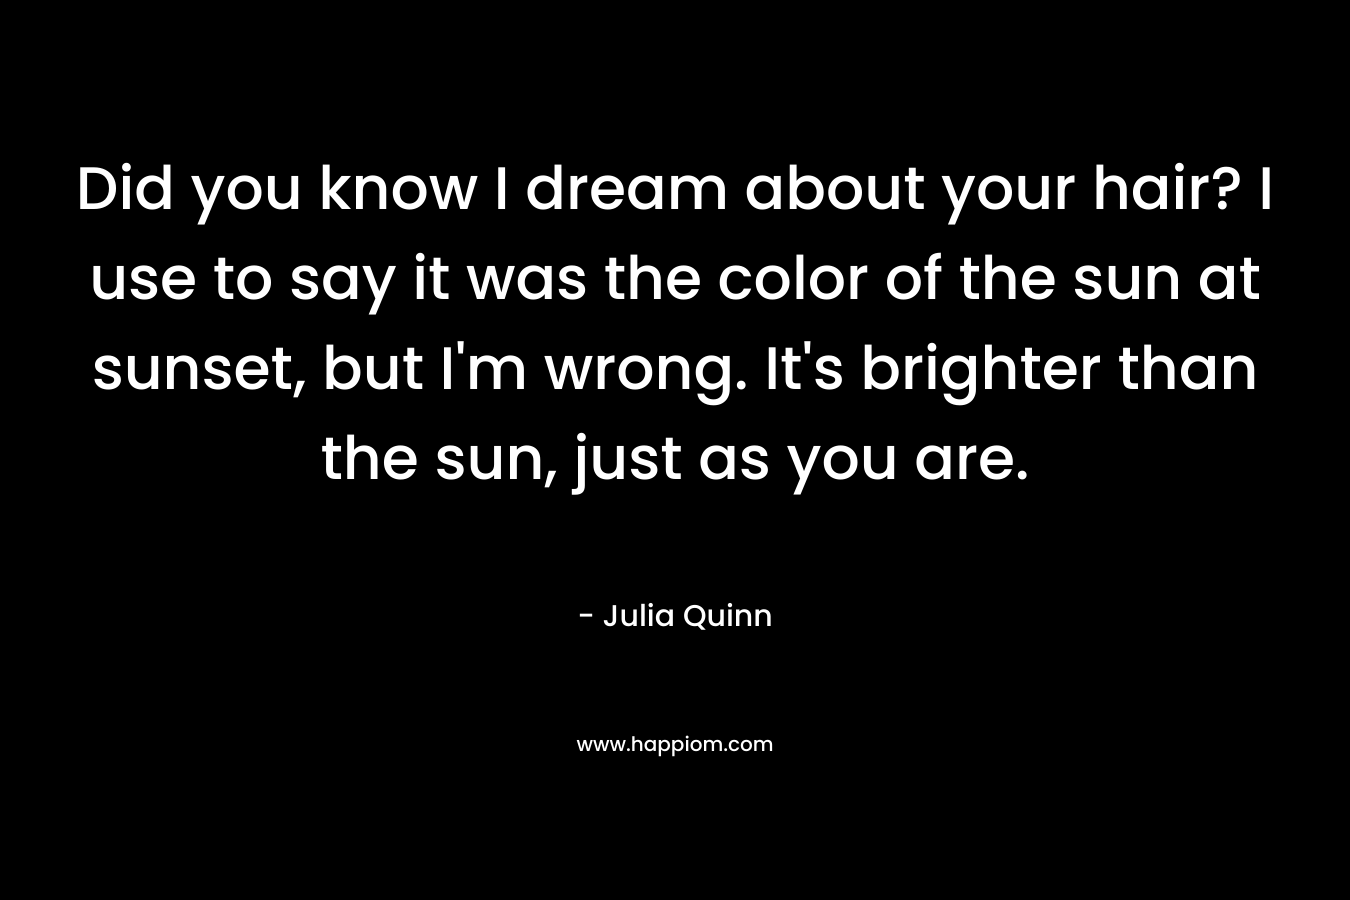 Did you know I dream about your hair? I use to say it was the color of the sun at sunset, but I’m wrong. It’s brighter than the sun, just as you are. – Julia Quinn